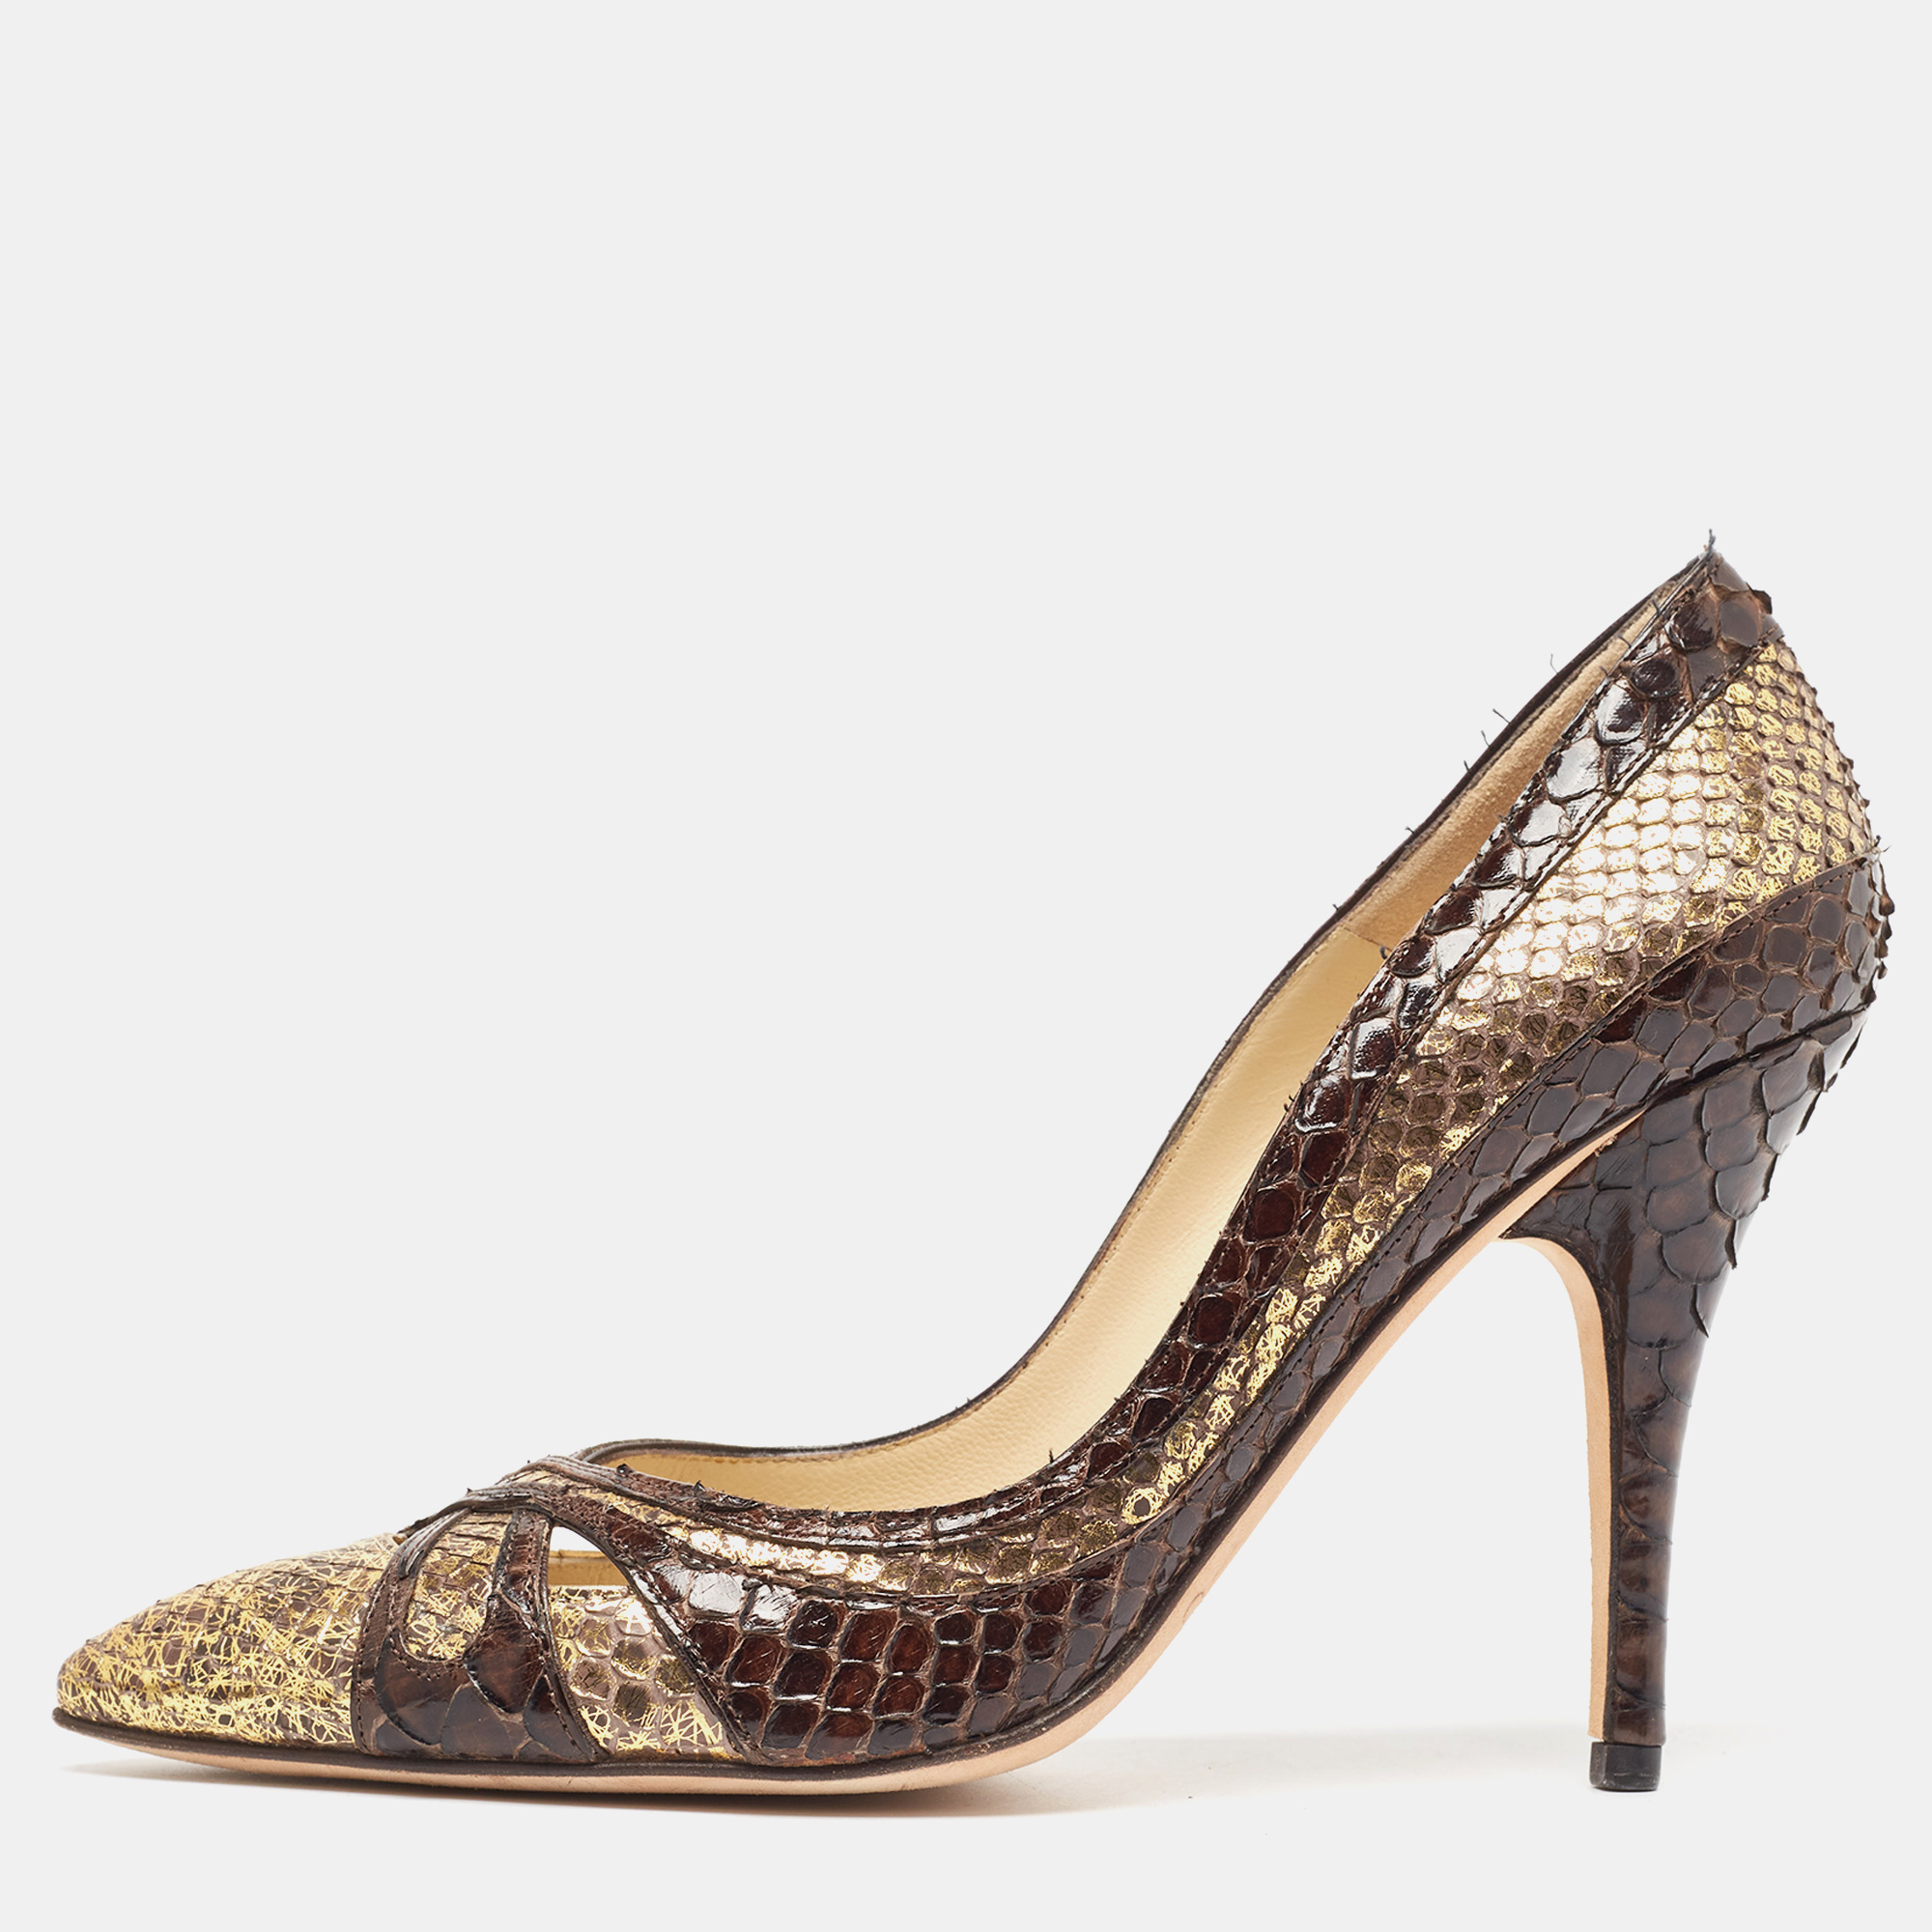 Pre-owned Jimmy Choo Brown/gold Python Pointed Toe Pumps Size 37